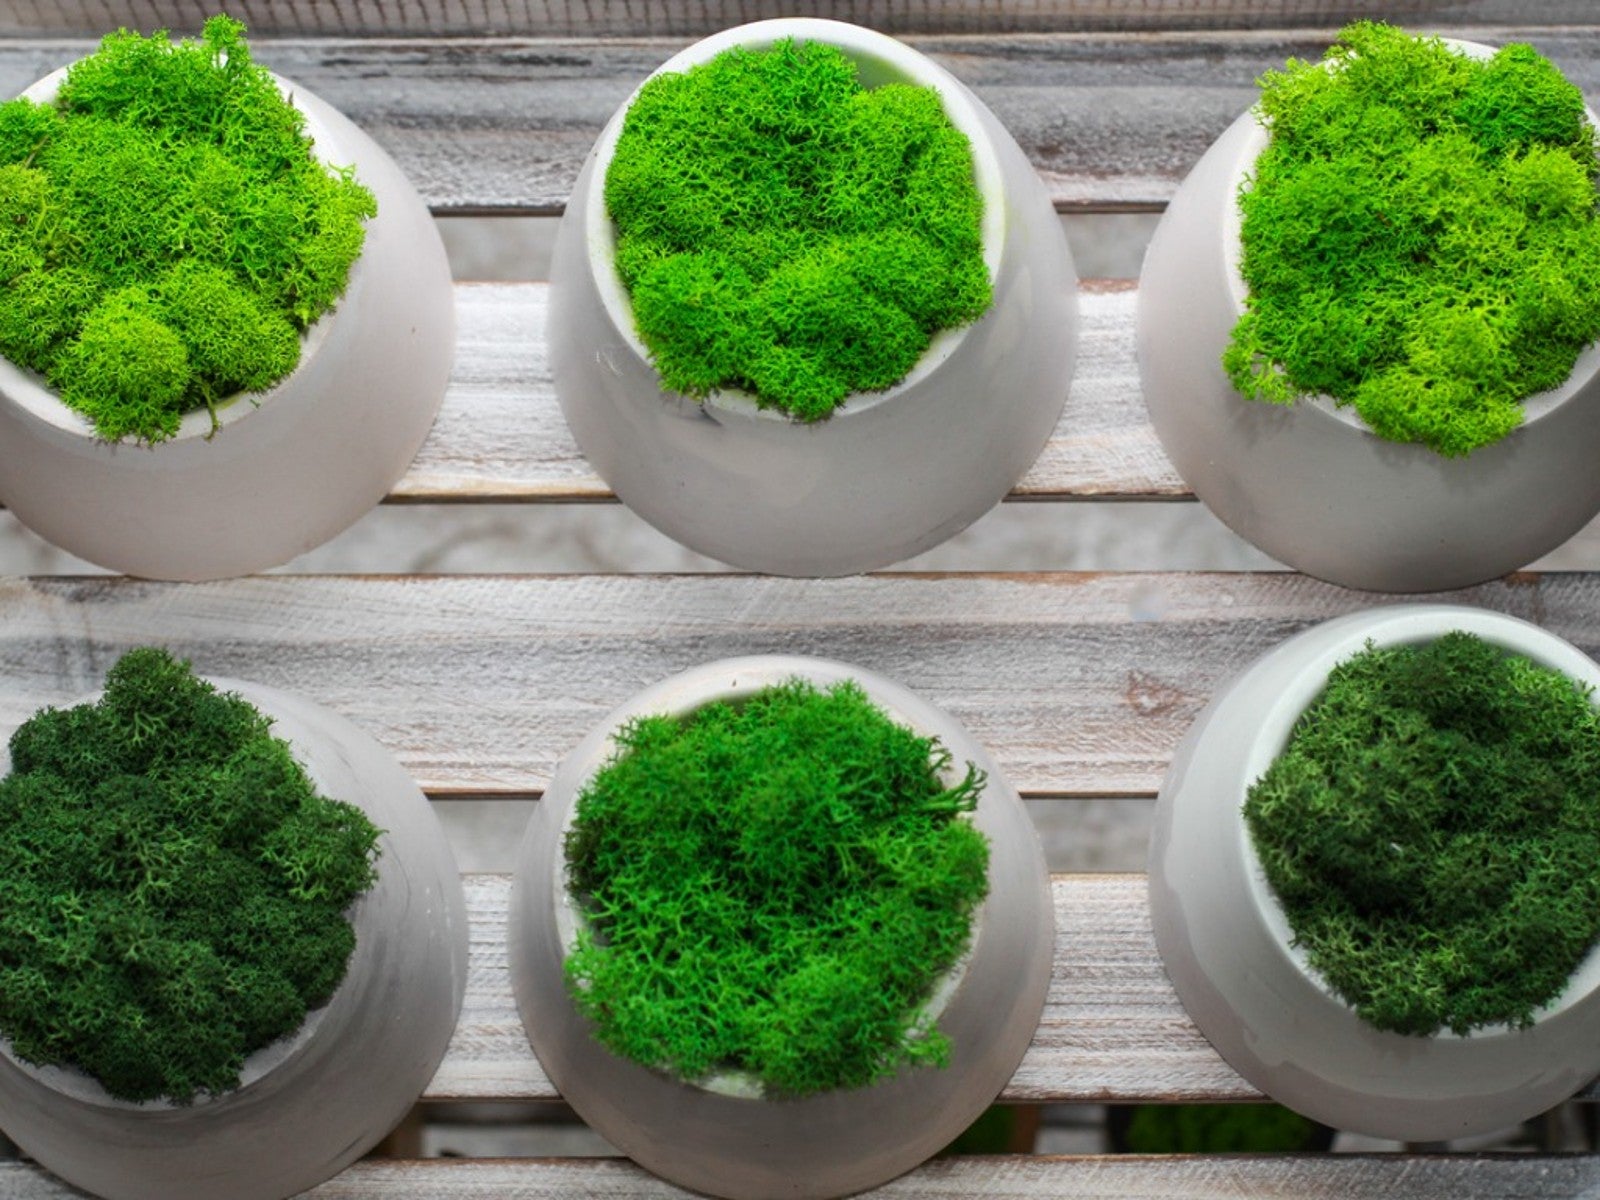 Moss In Plant Pots: Tips On Growing Moss In Containers